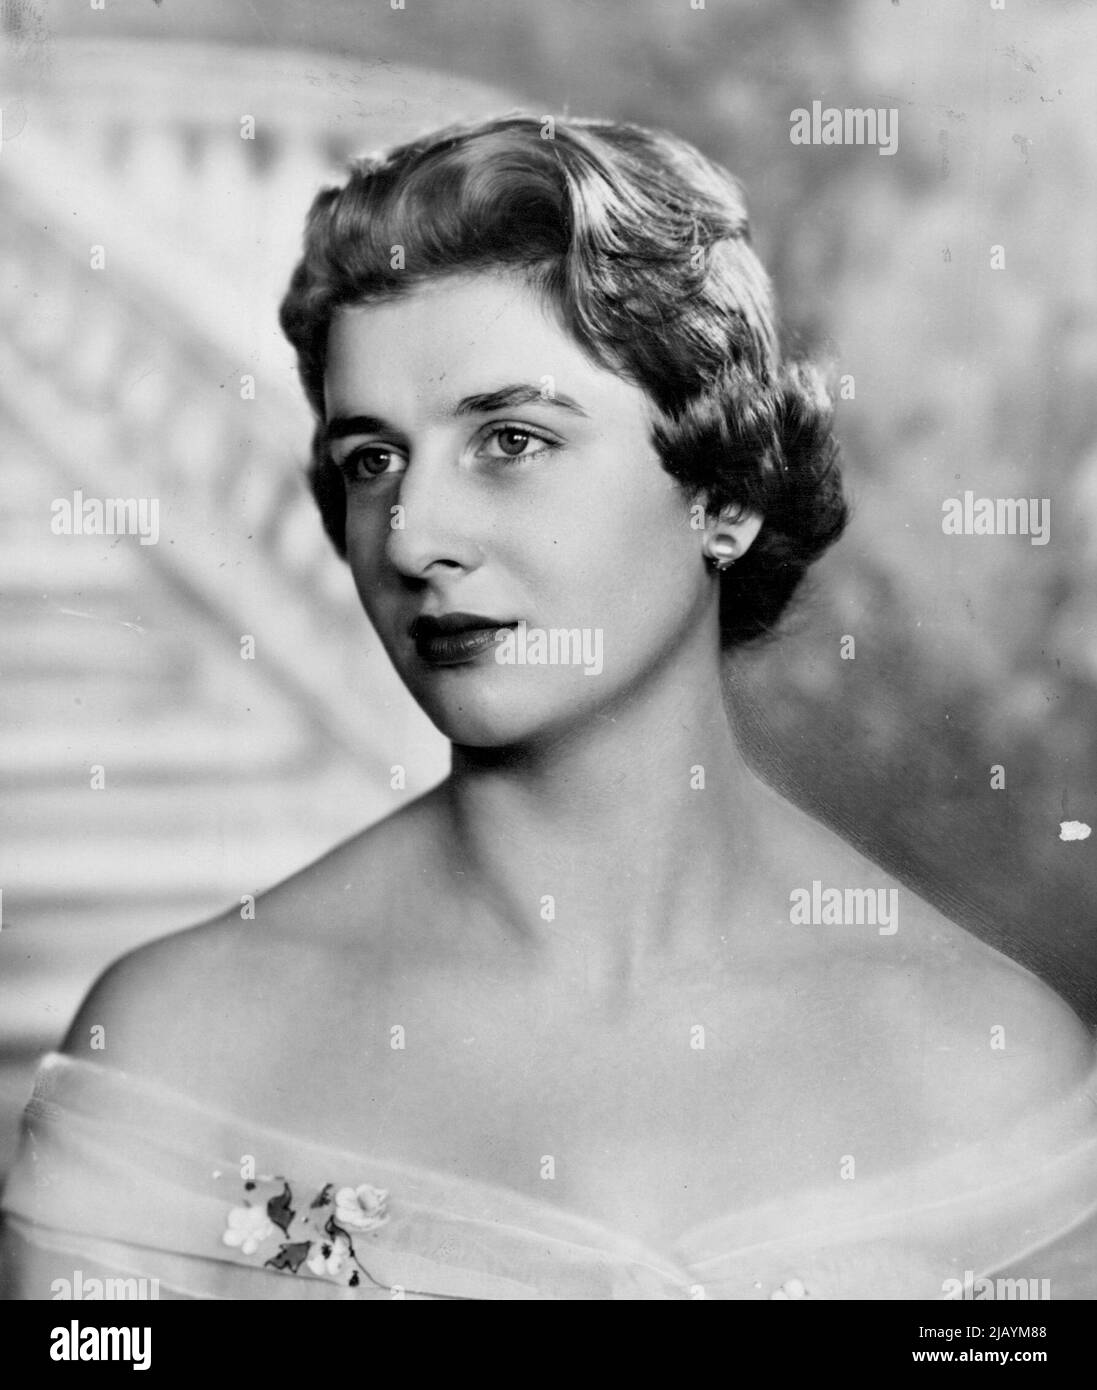 H.R.H. Princess Alexandra, Aged 19 -- On Xmas Day, December 25, 1955, H.R.H. Princess Alexandra Helen Elizabeth Olga Christabel, the daughter of the Duchess of Kent, will celebrate her 19th birthday. December 25, 1955. (Photo by Dorothy Wilding, Camera Press) Stock Photo